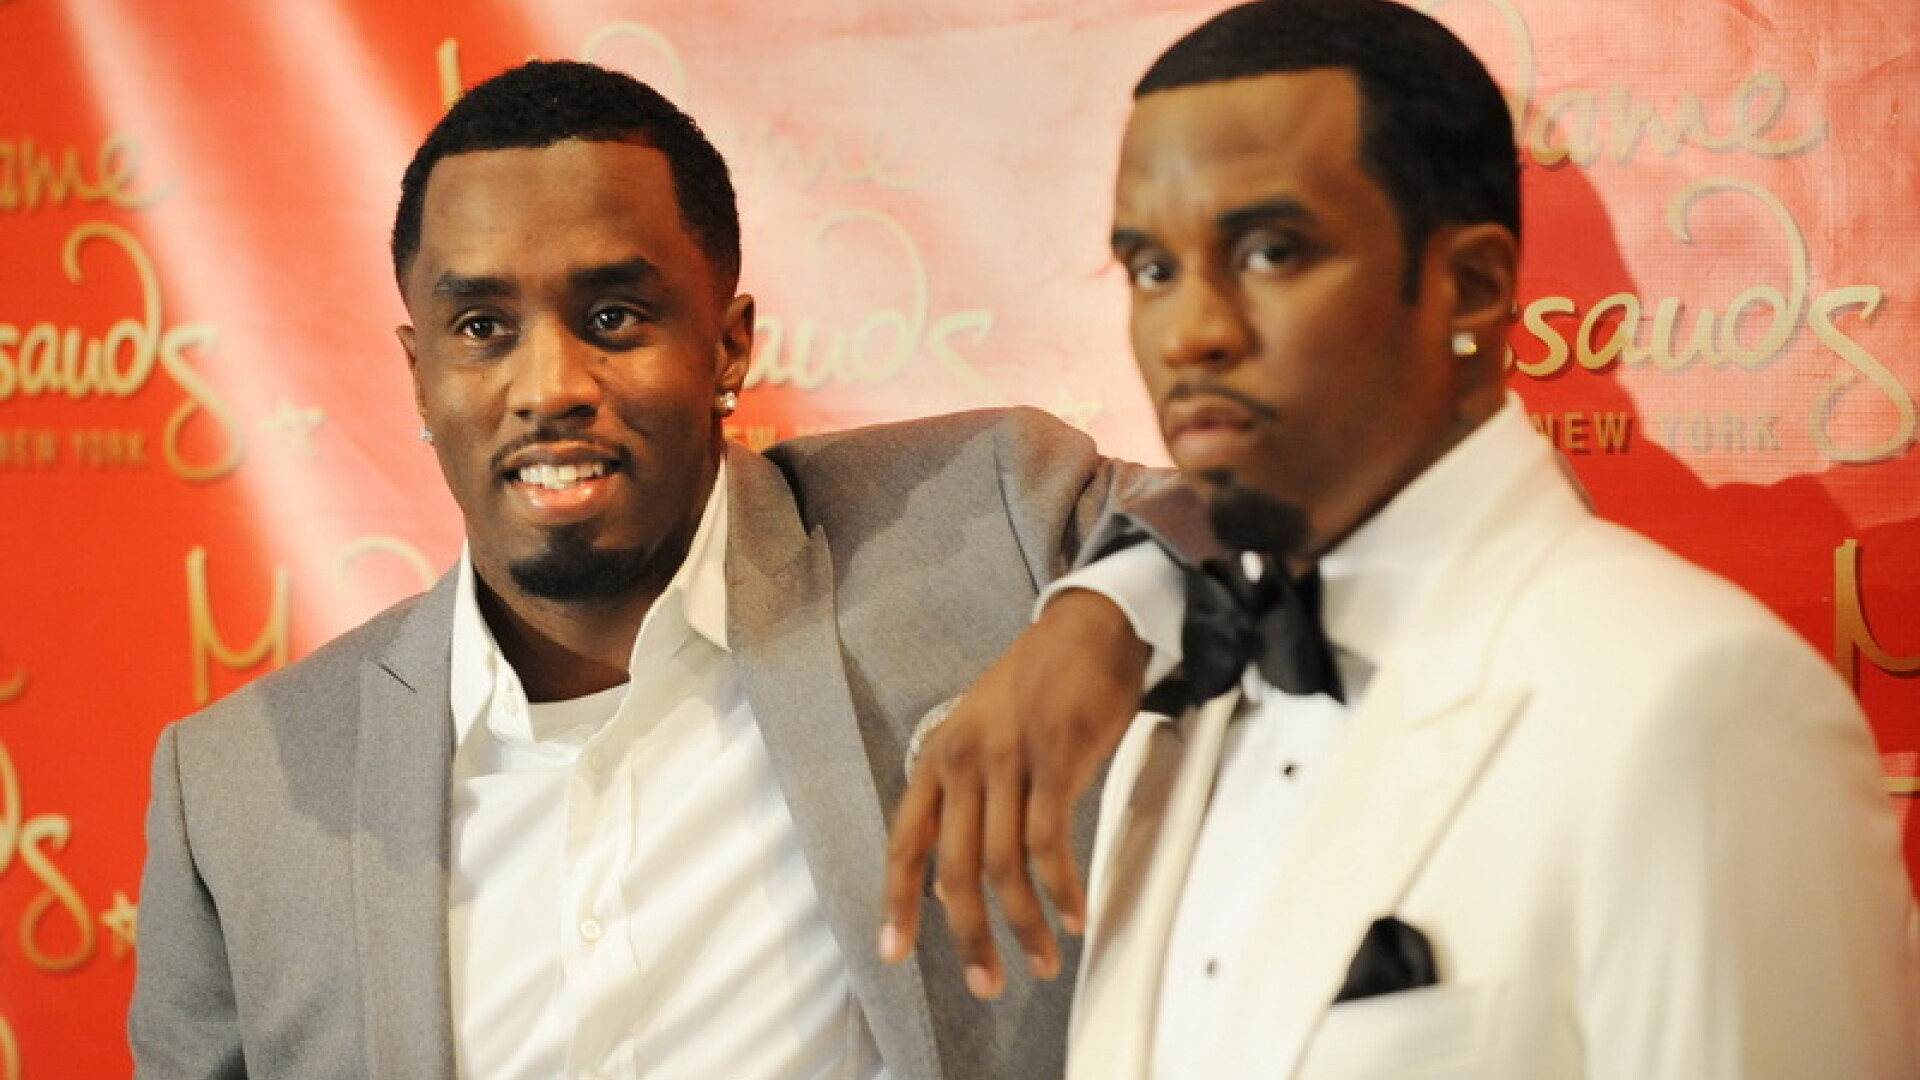 P.Diddy, Madame Tussauds